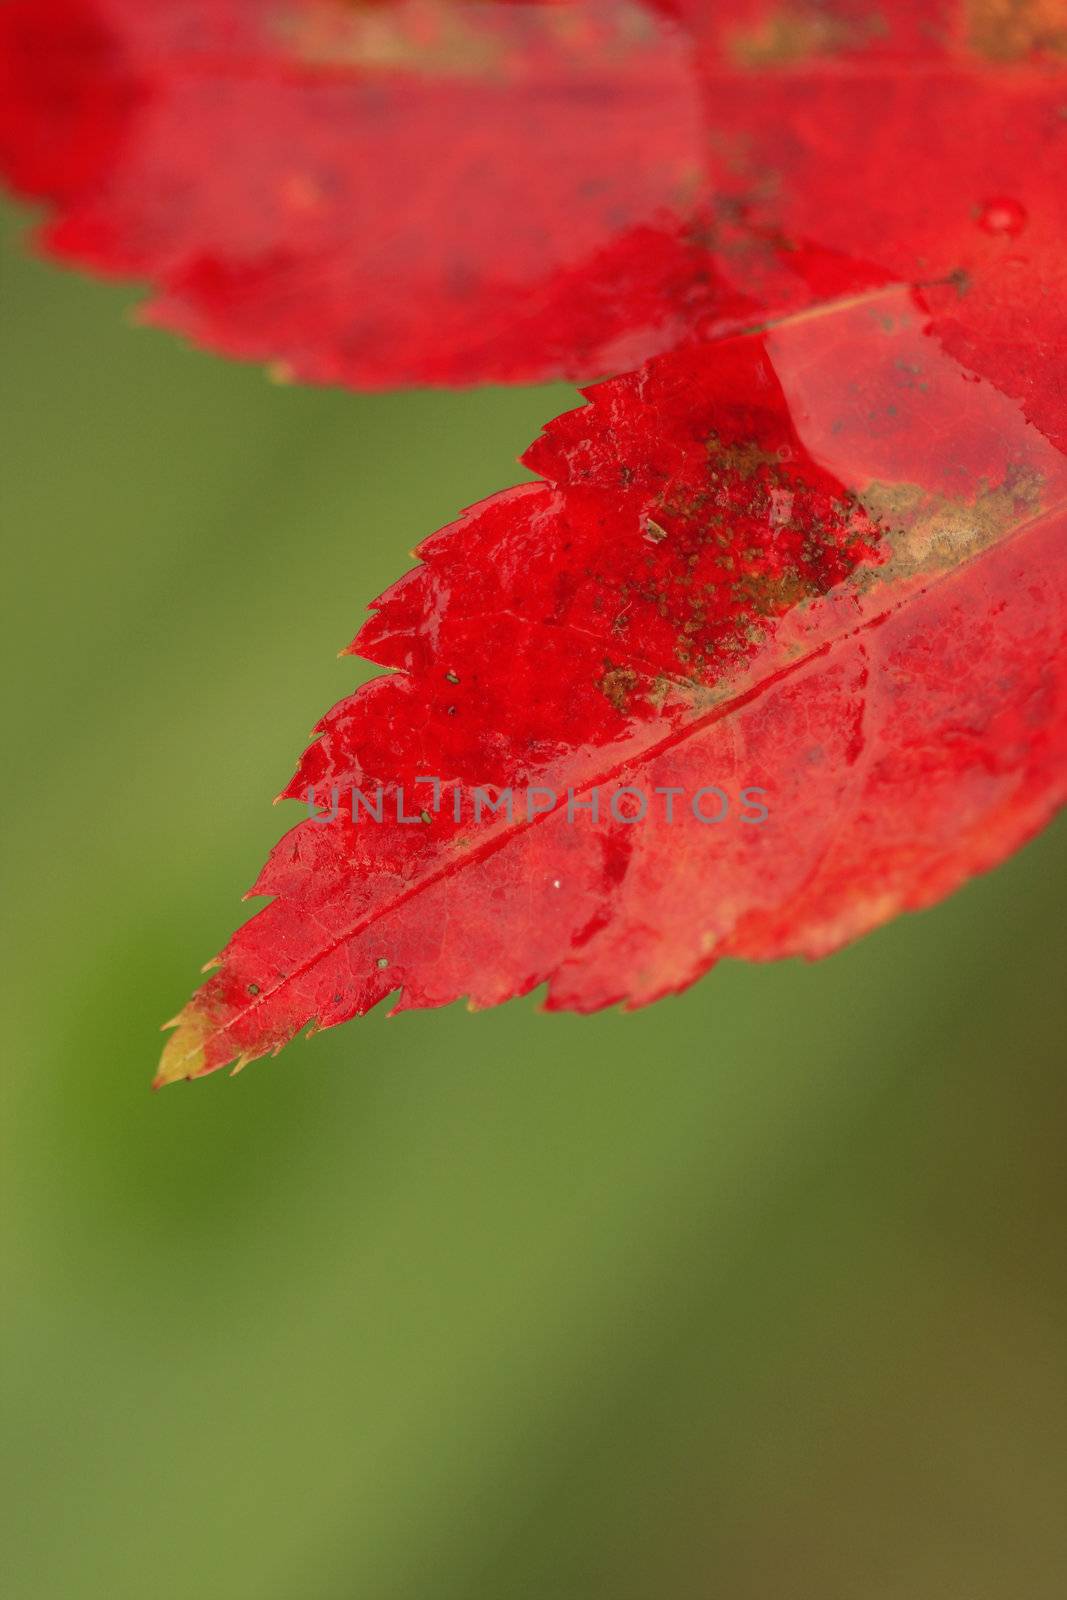 beautiful close-up of maple red leaf with warm green background.